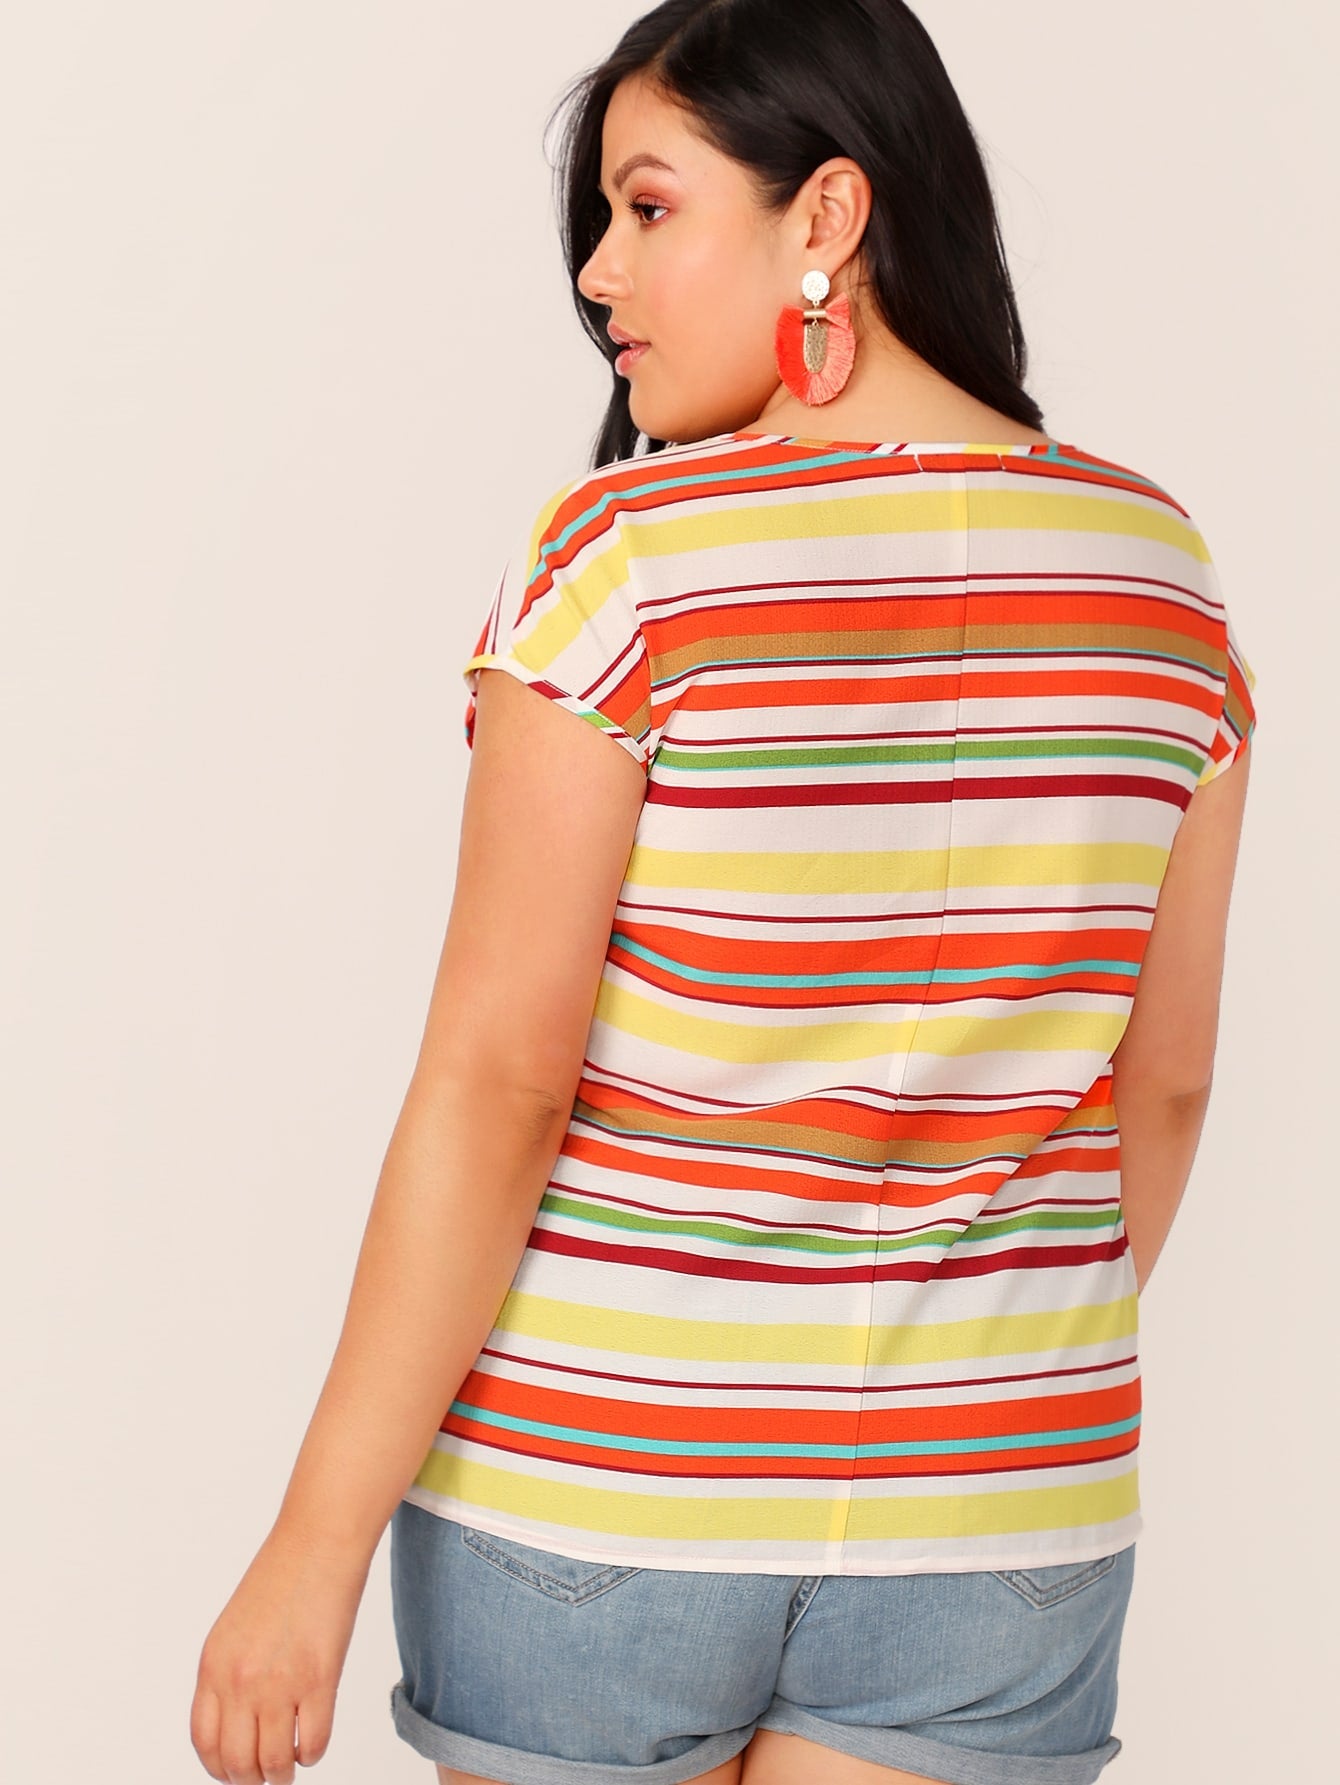 Plus Curved Colorful Striped Top